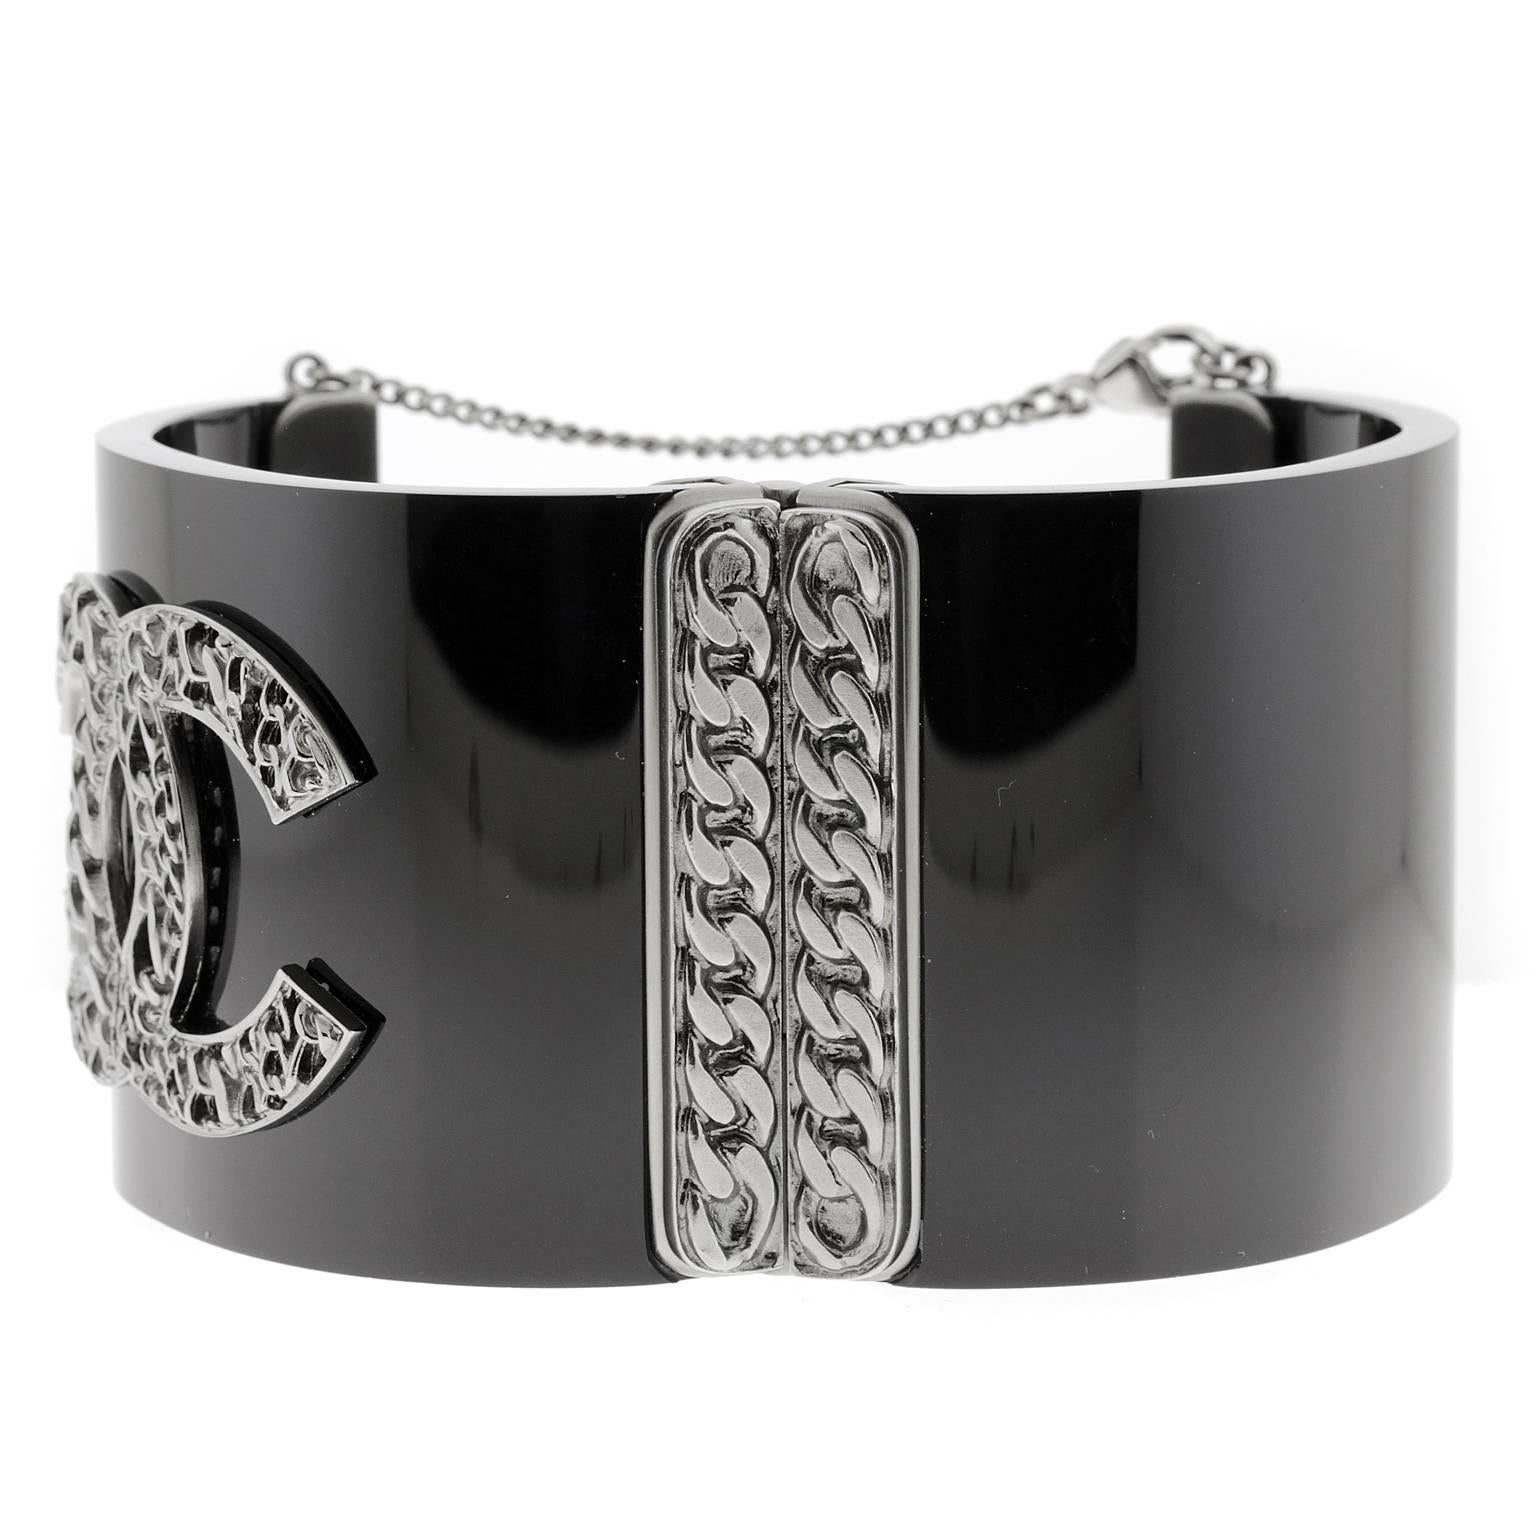  Chanel Black Resin Wide Cuff - Pristine and Unworn
 Edgy and classic at the same time, this piece is certain to become a wardrobe favorite with everything from jeans to gowns.  
Black resin hinged cuff with silver hardware.  Large interlocking CC